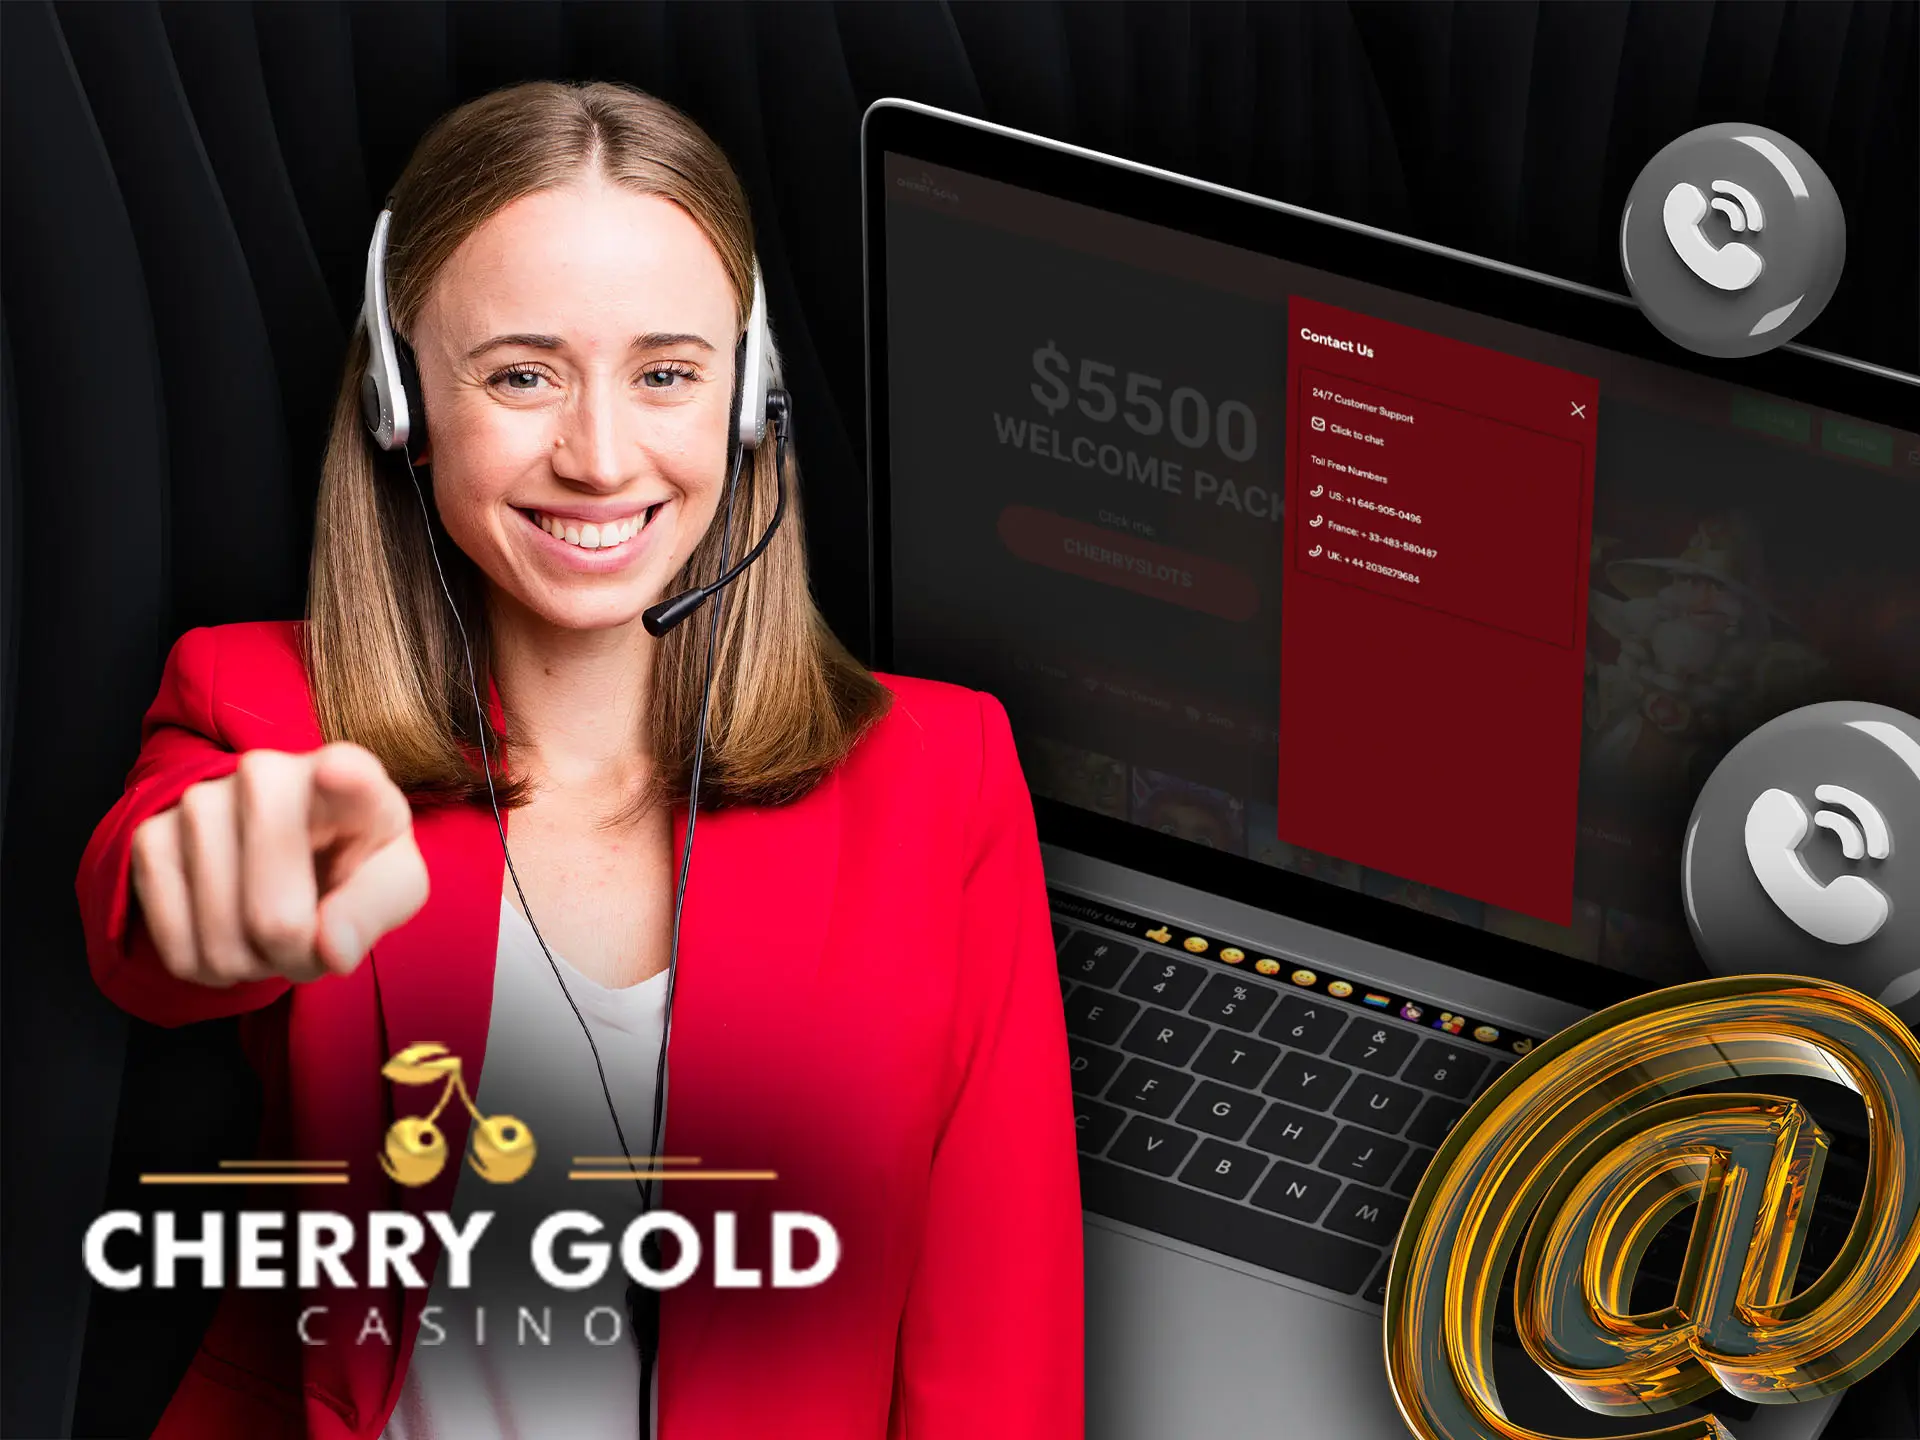 How to contact Cherry Gold Casino support.